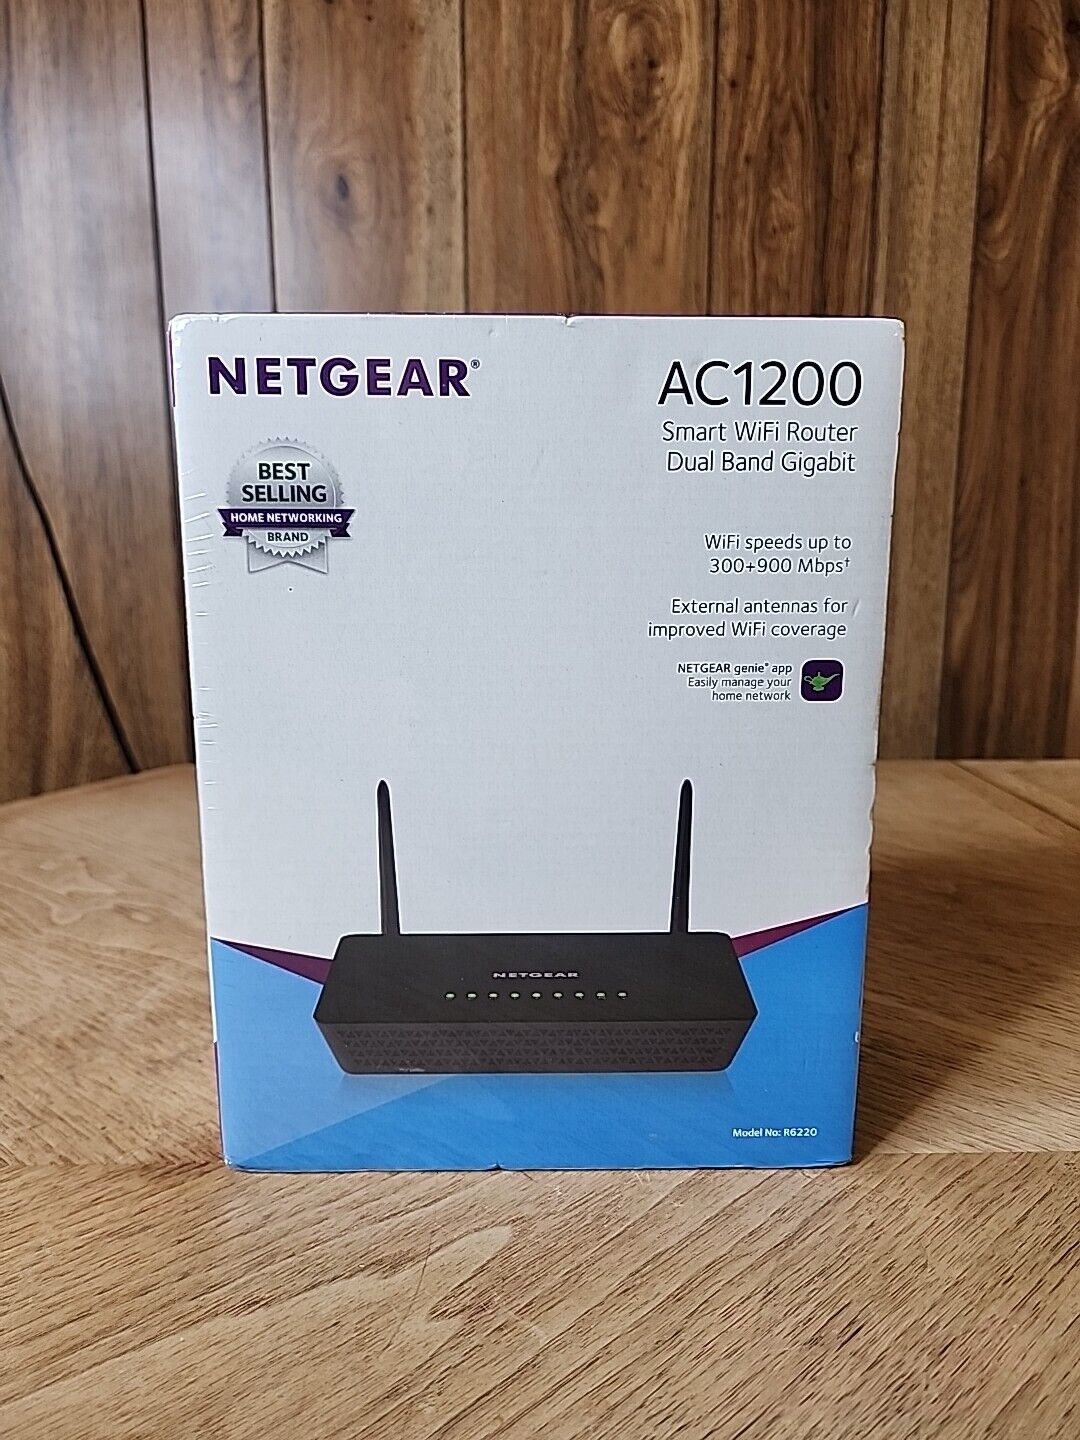 NETGEAR AC1200 R6220-100NAS Smart Wi-Fi Router Brand New Sealed